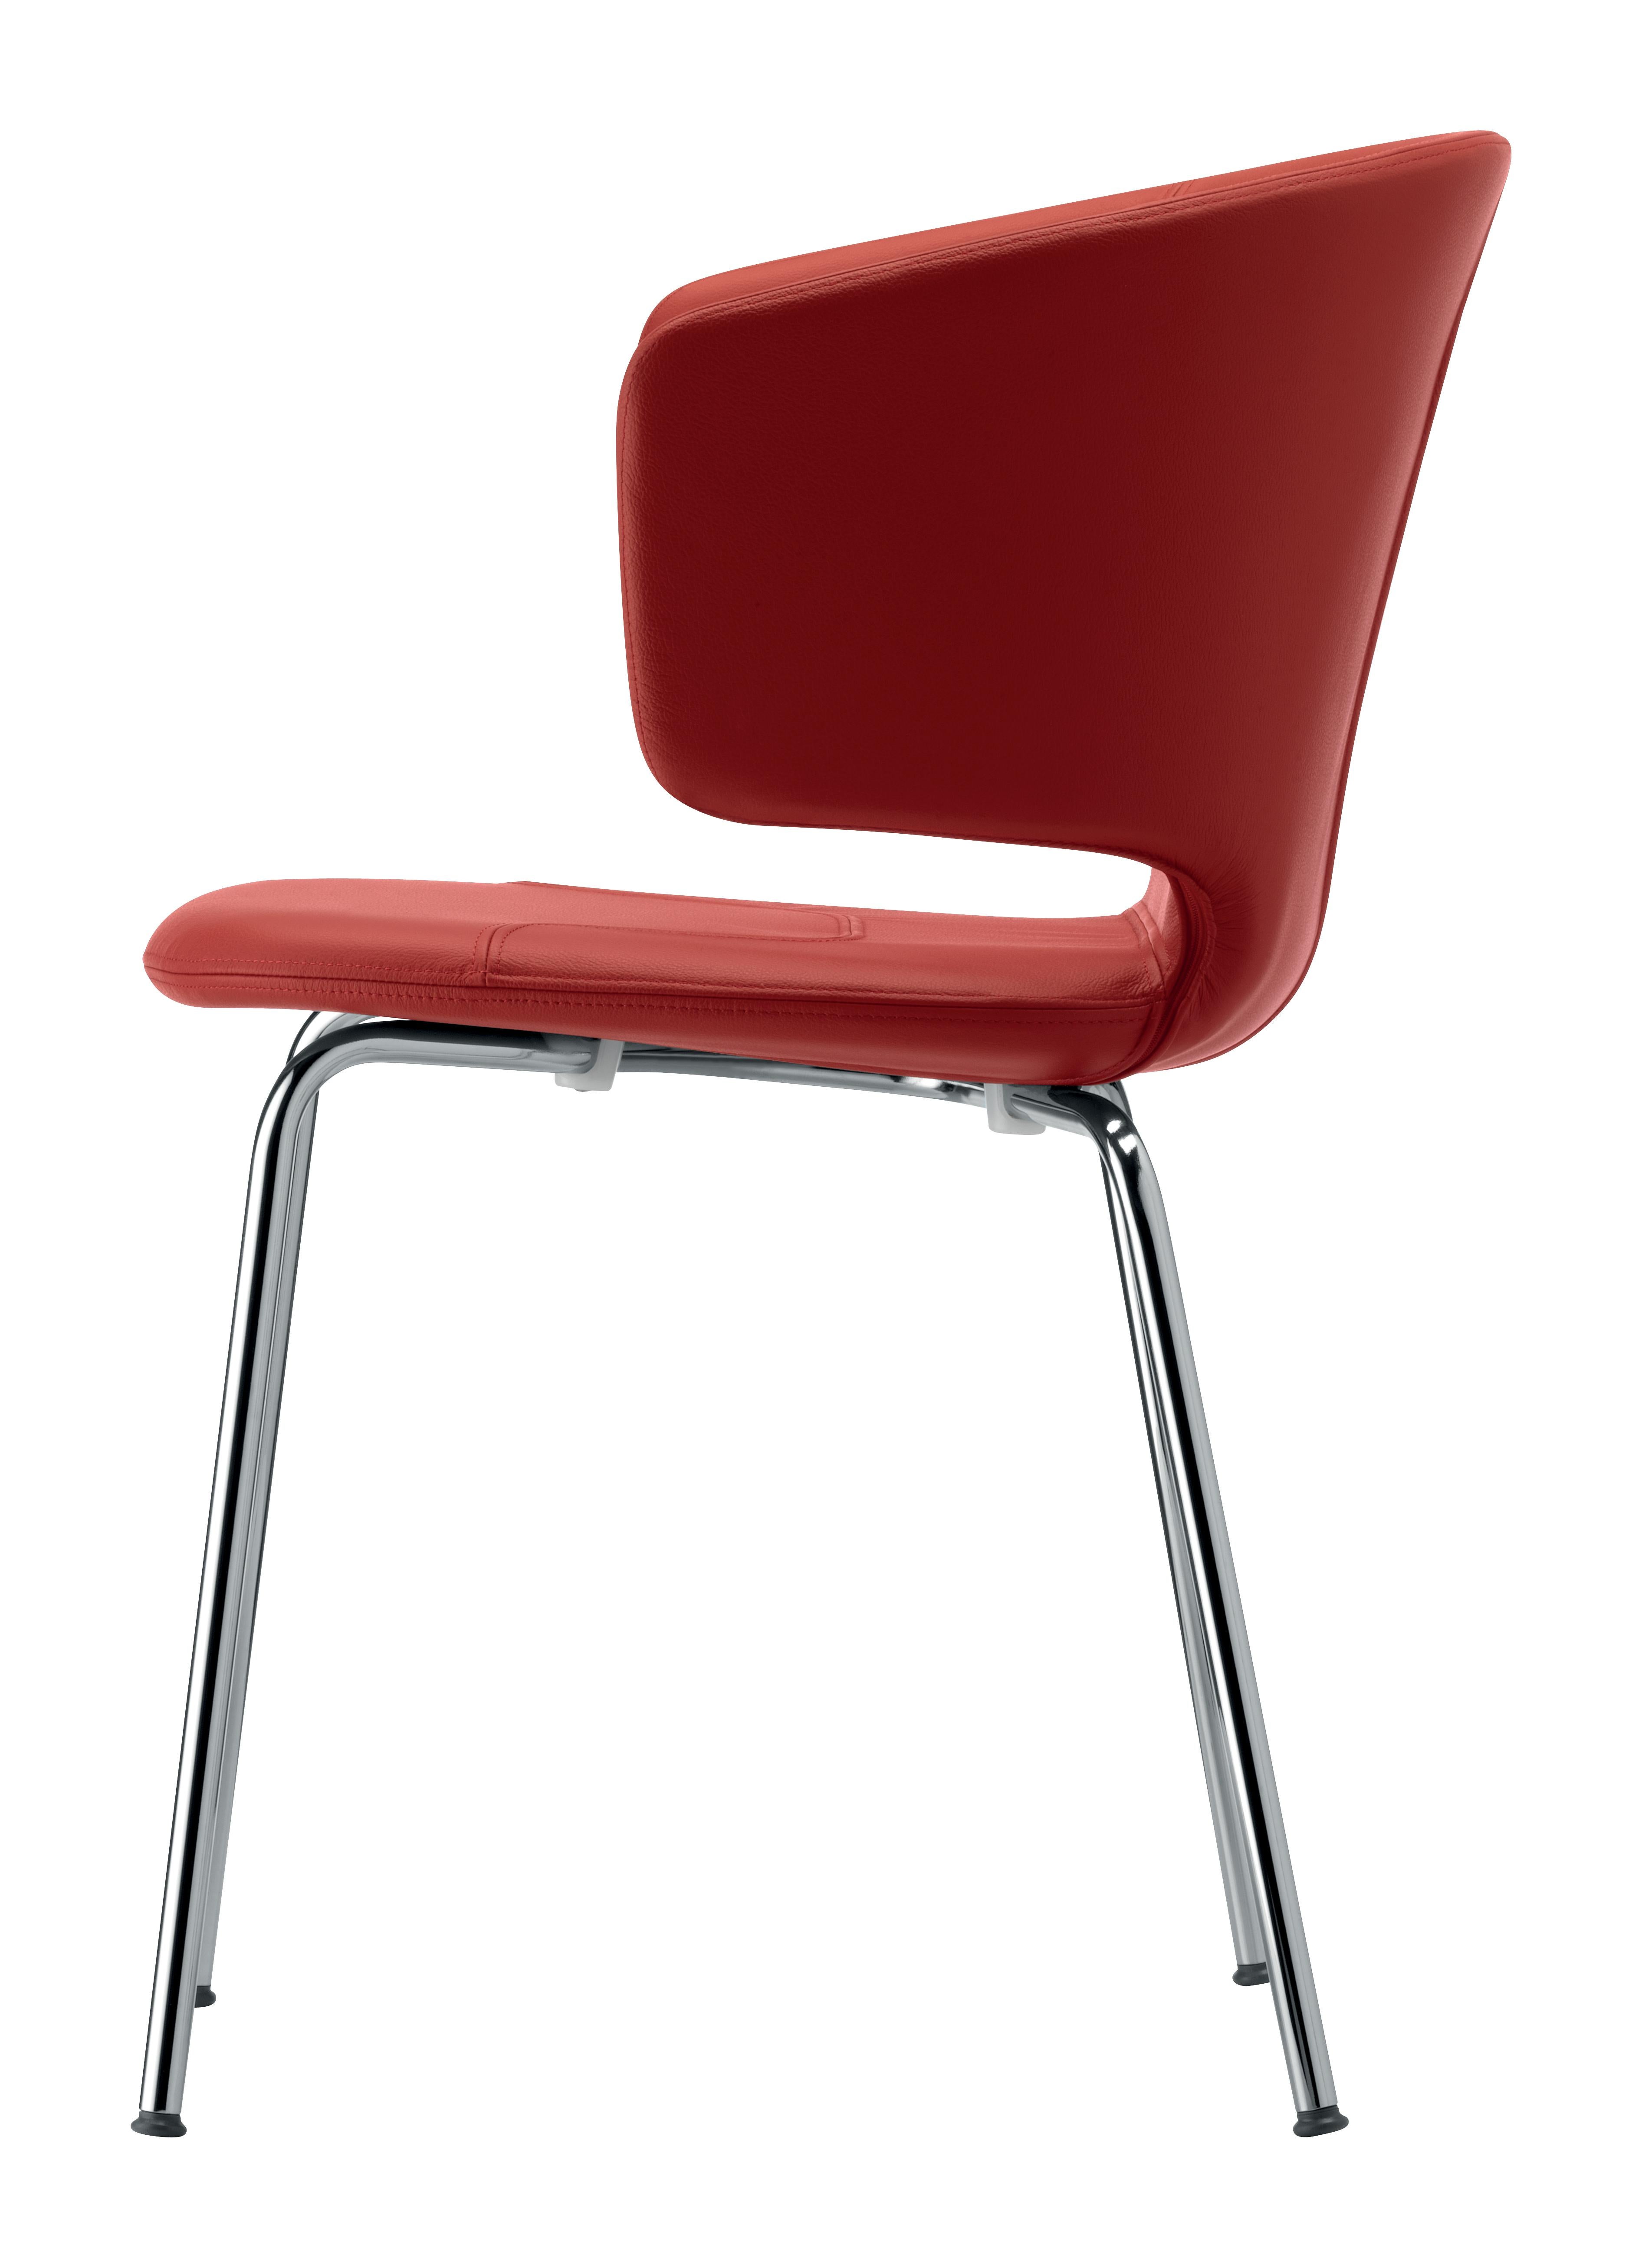 Alias 503 Taormina Chair in Red Seat and Chromed Steel Frame by Alfredo Häberli

Armchair with structure in lacquered or chromed steel. Seat and back in solid plastic material padded with CFC free expanded polyurethane foam, removable cover in